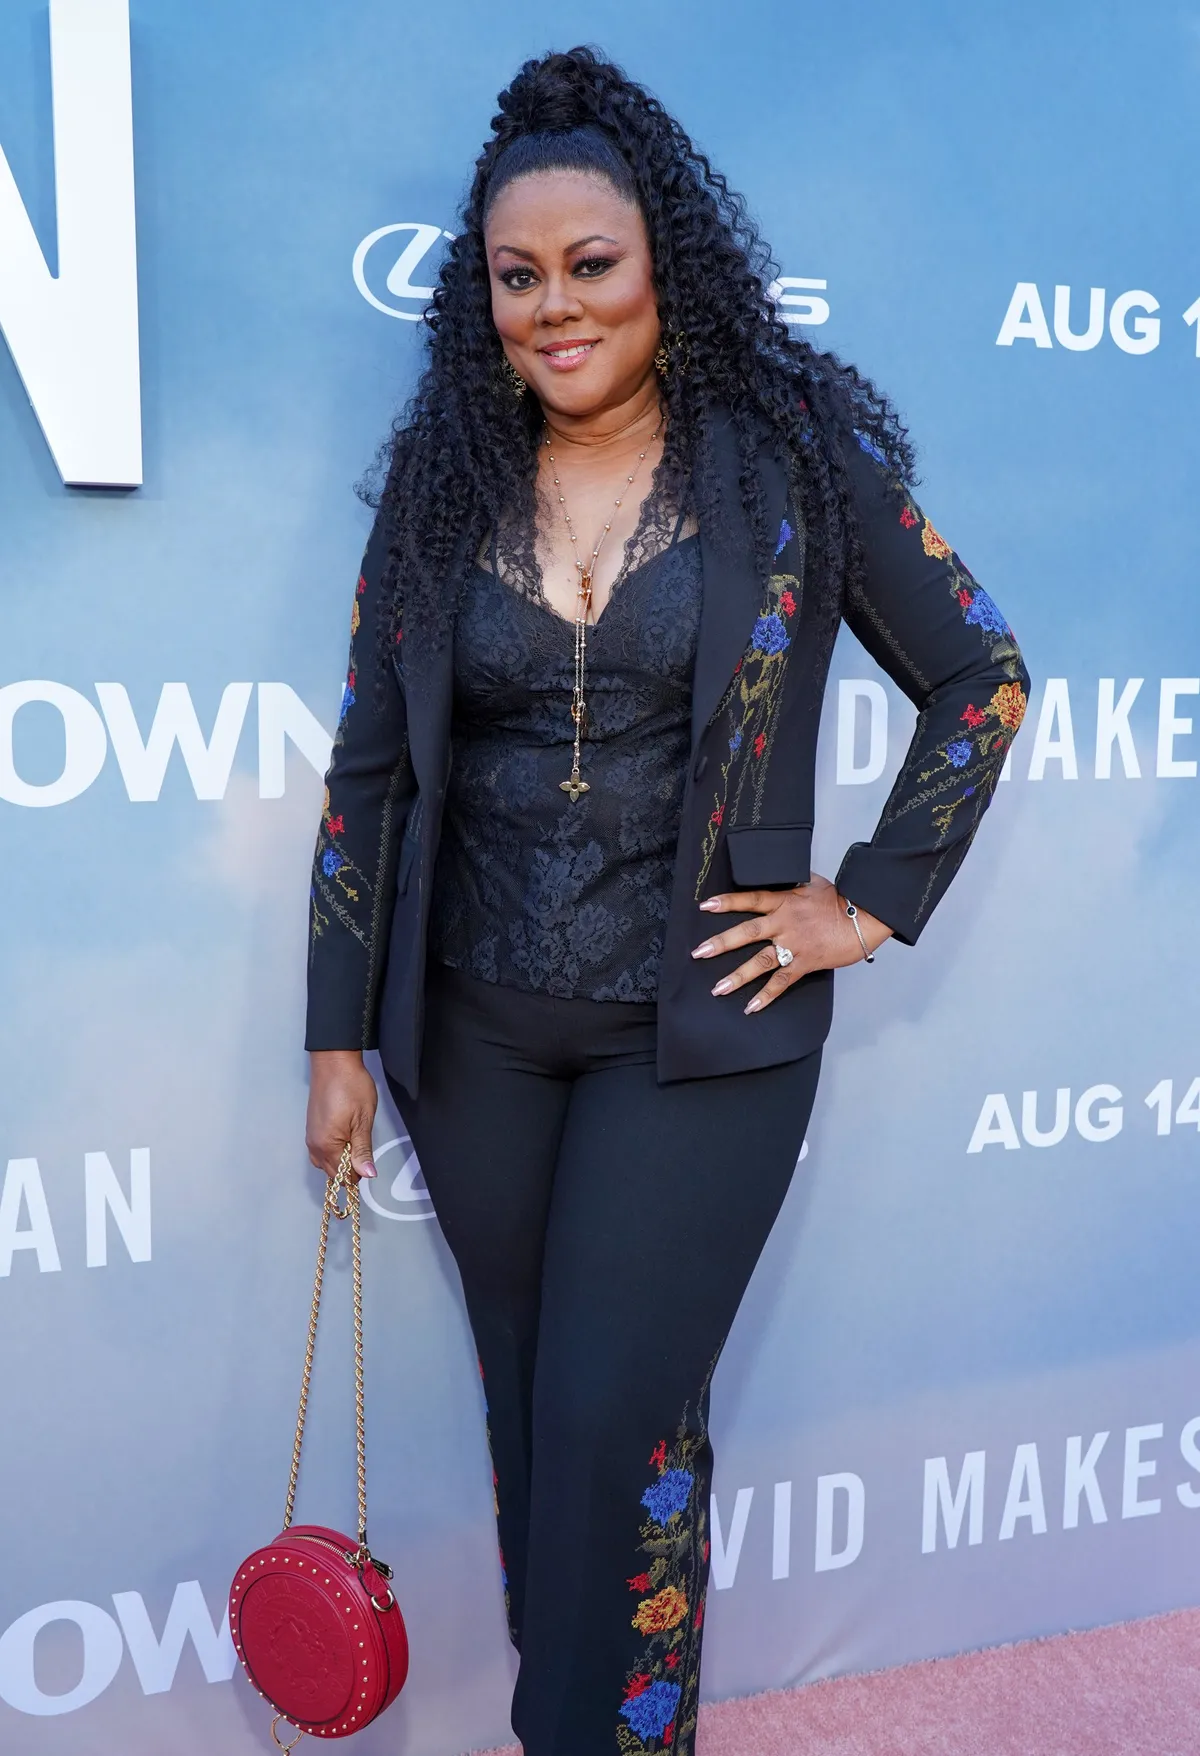 Lela Rochon attends the premiere of OWN's "David Makes Man" at NeueHouse Hollywood on August 6, 2019. | Photo: Getty Images